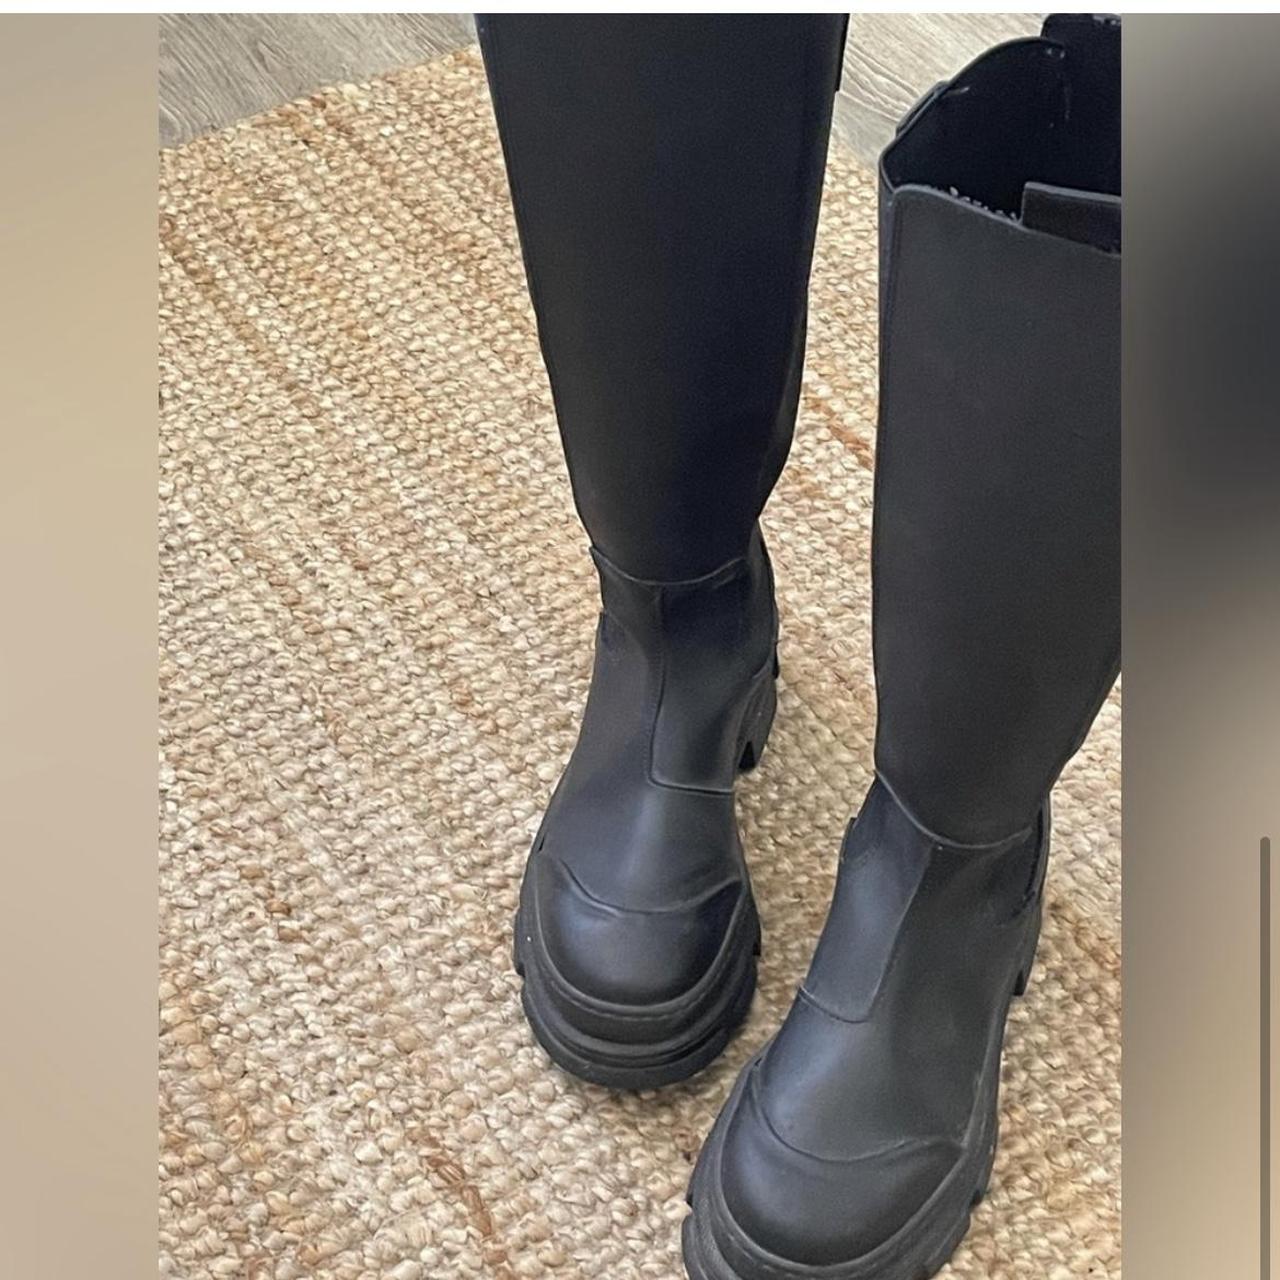 Pavement rubber boots Ganni dupes Offers welcome IT... - Depop